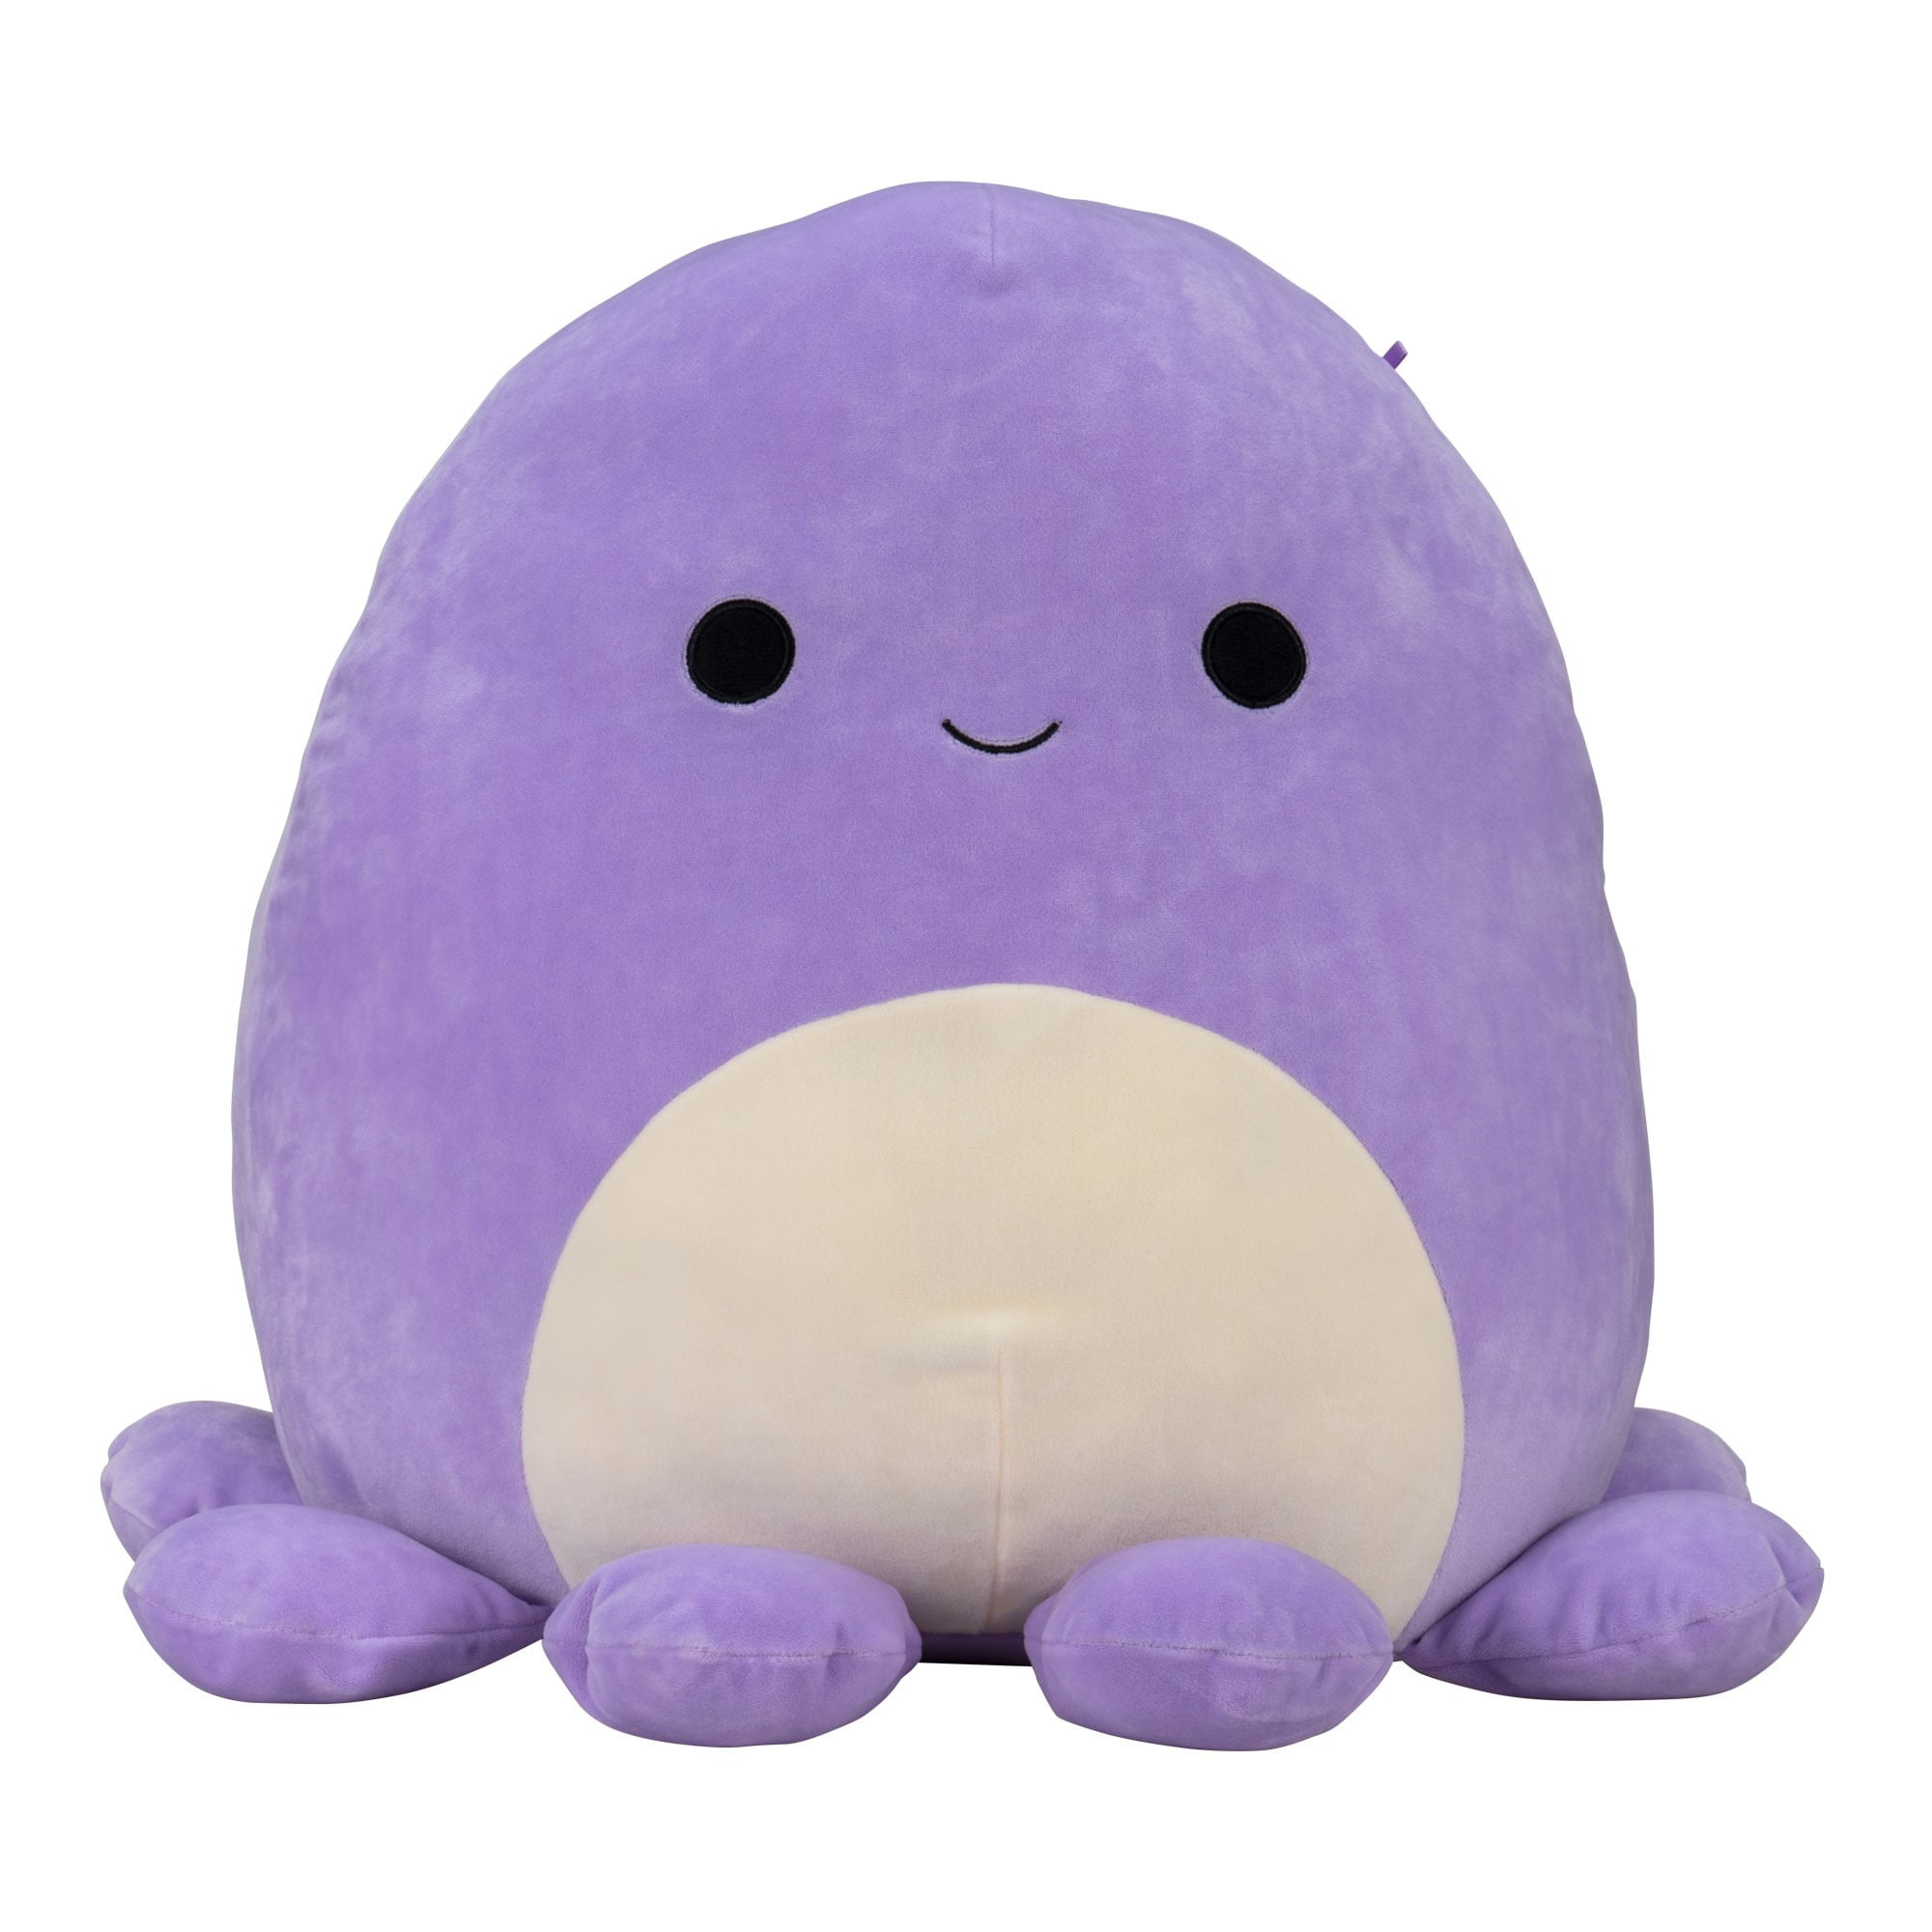 Squishmallows Easter Bunnycorn 16 inch Plush Toy for sale online 